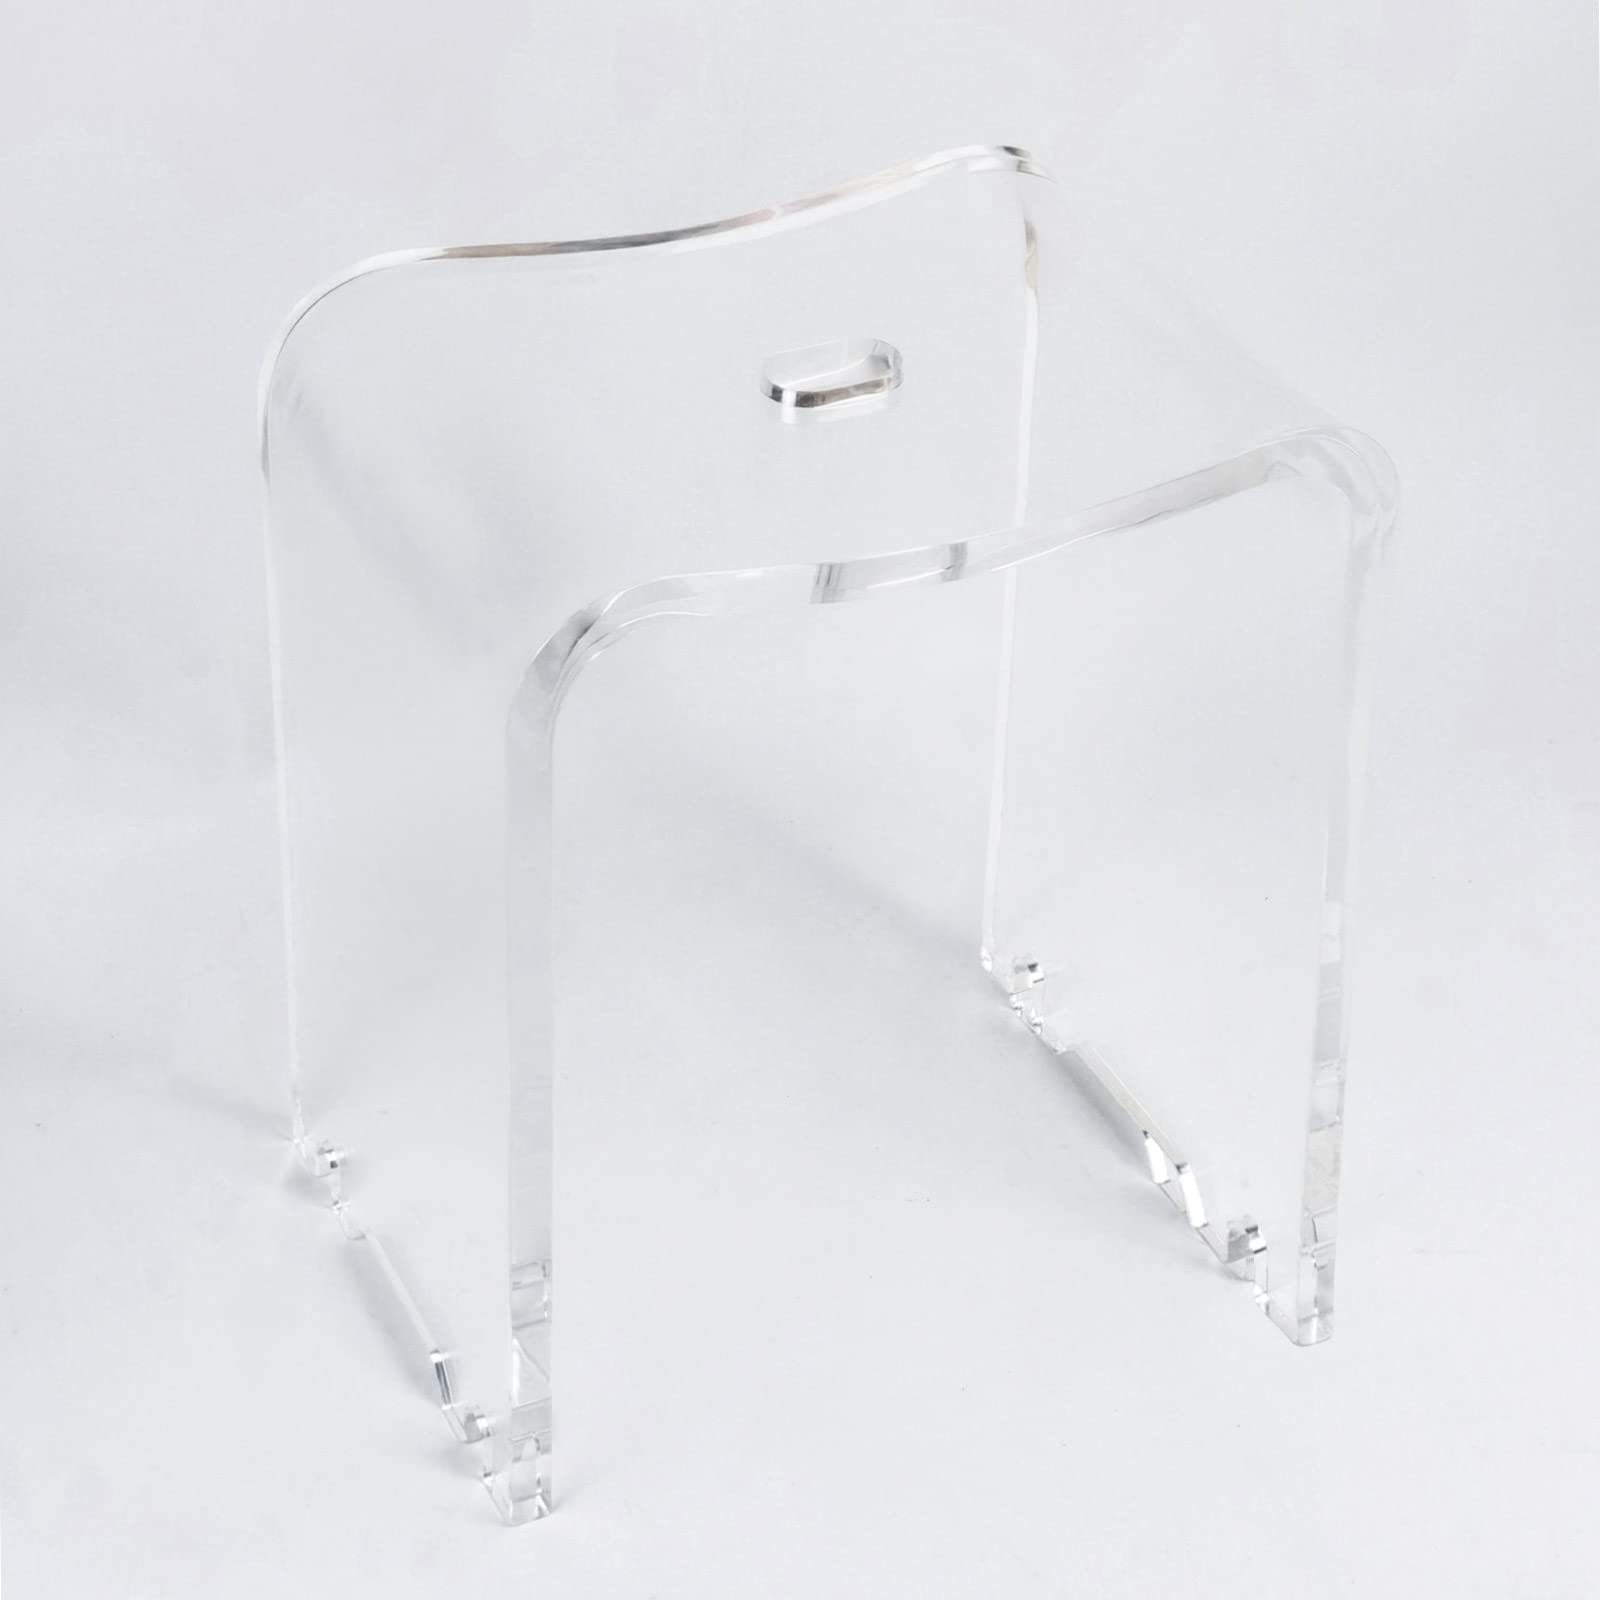 NEJHC Acrylic Shower Bench, Clear Shower Stool Bath Seat with Anti-Slip Feets and Water Flowing Design, Beautiful Integrated Acrylic, No Assembly Required, 300lbs Weight Capacity